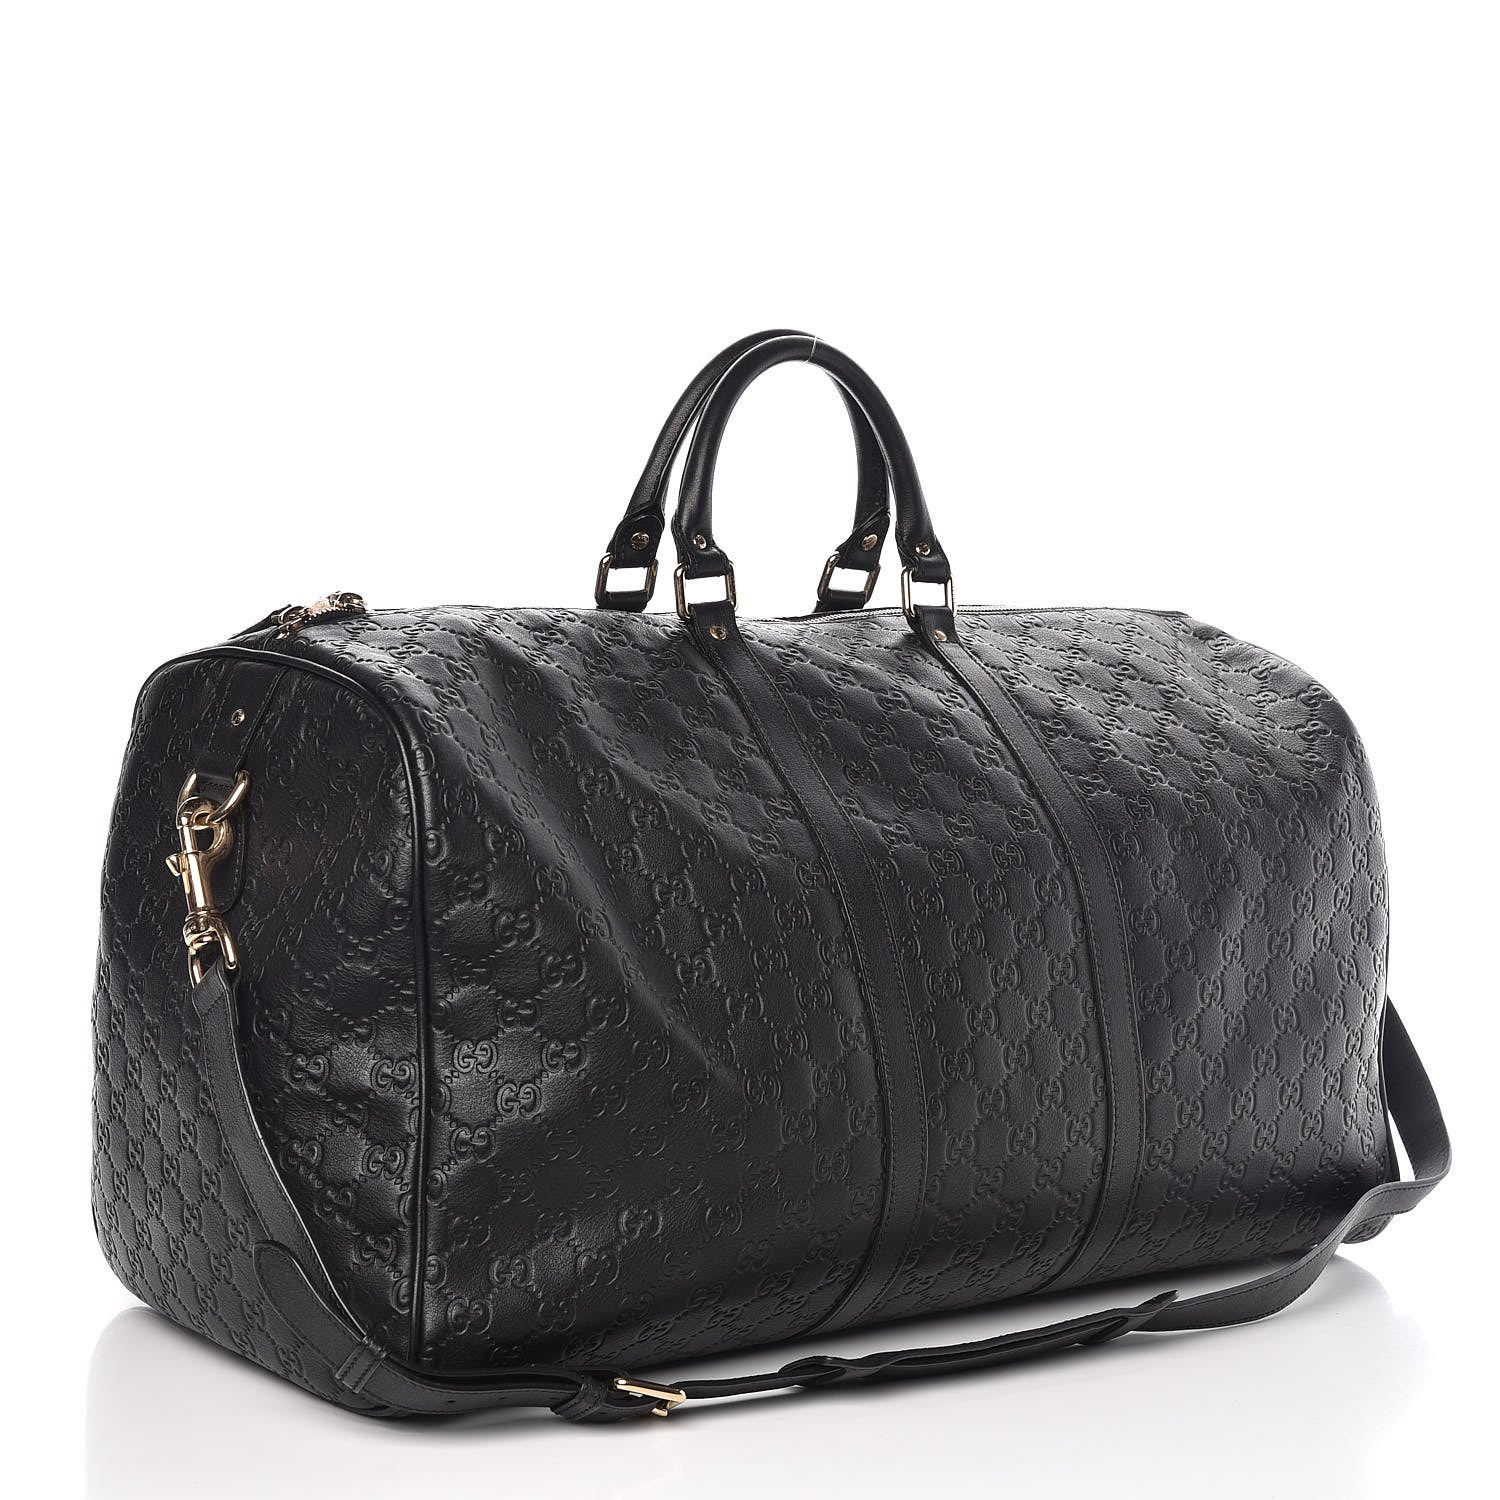 GUCCI BLACK EMBOSSED LEATHER DUFFLE – Caroline's Fashion Luxuries